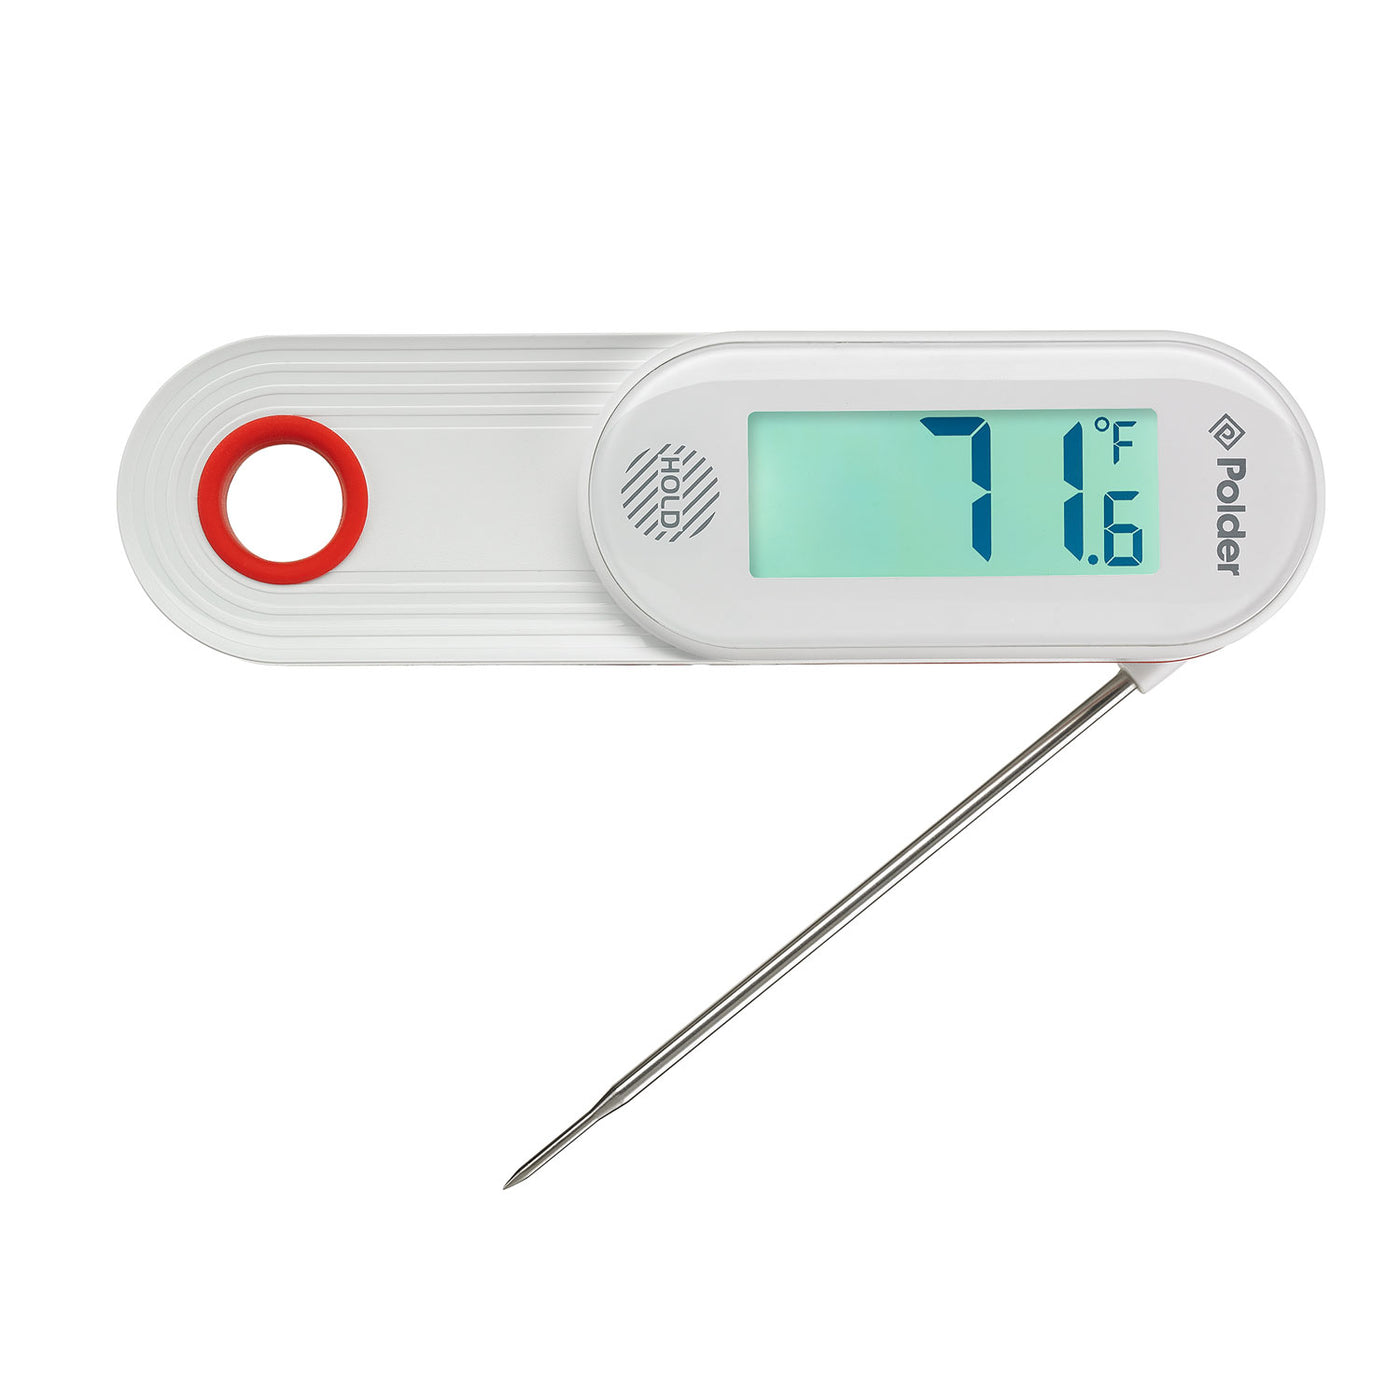 Polder Waterproof Instant Read Thermometer, Meat Thermometer for Cooking, Food Thermometer with Folding Probe, Intuitive Digital Thermometer with